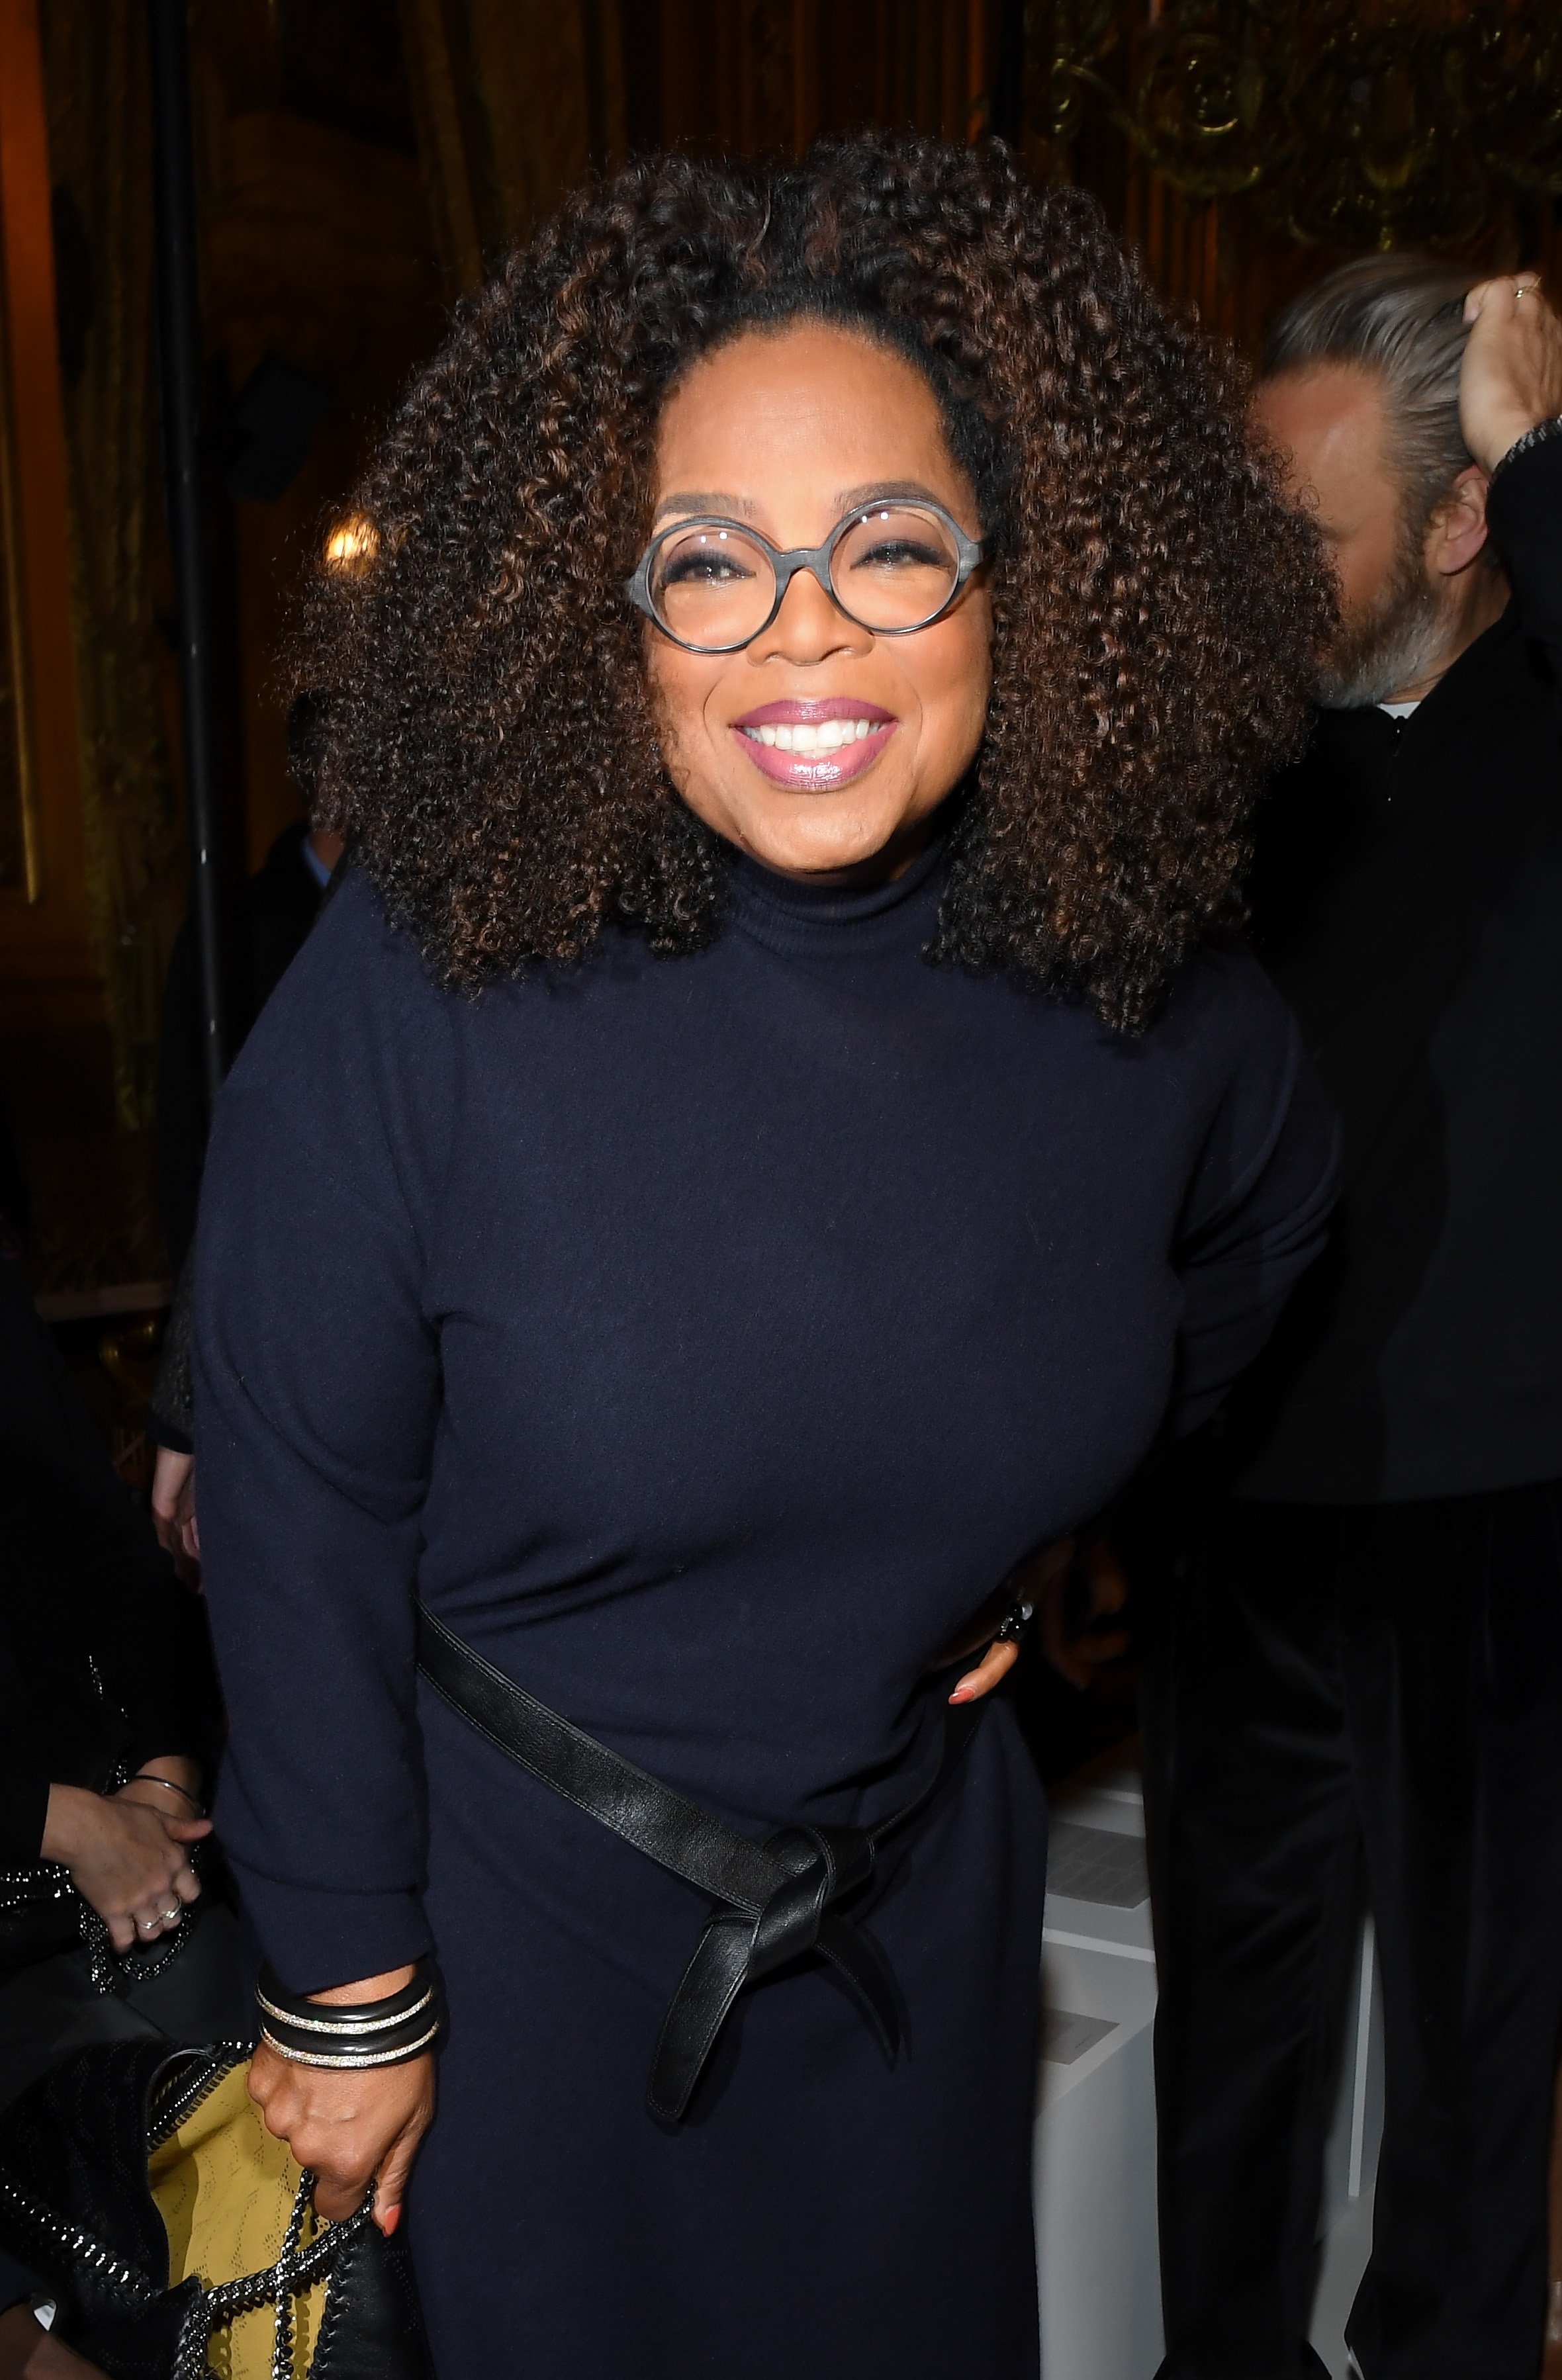 Oprah Winfrey on March 04, 2019 in Paris, France | Photo: Getty Images